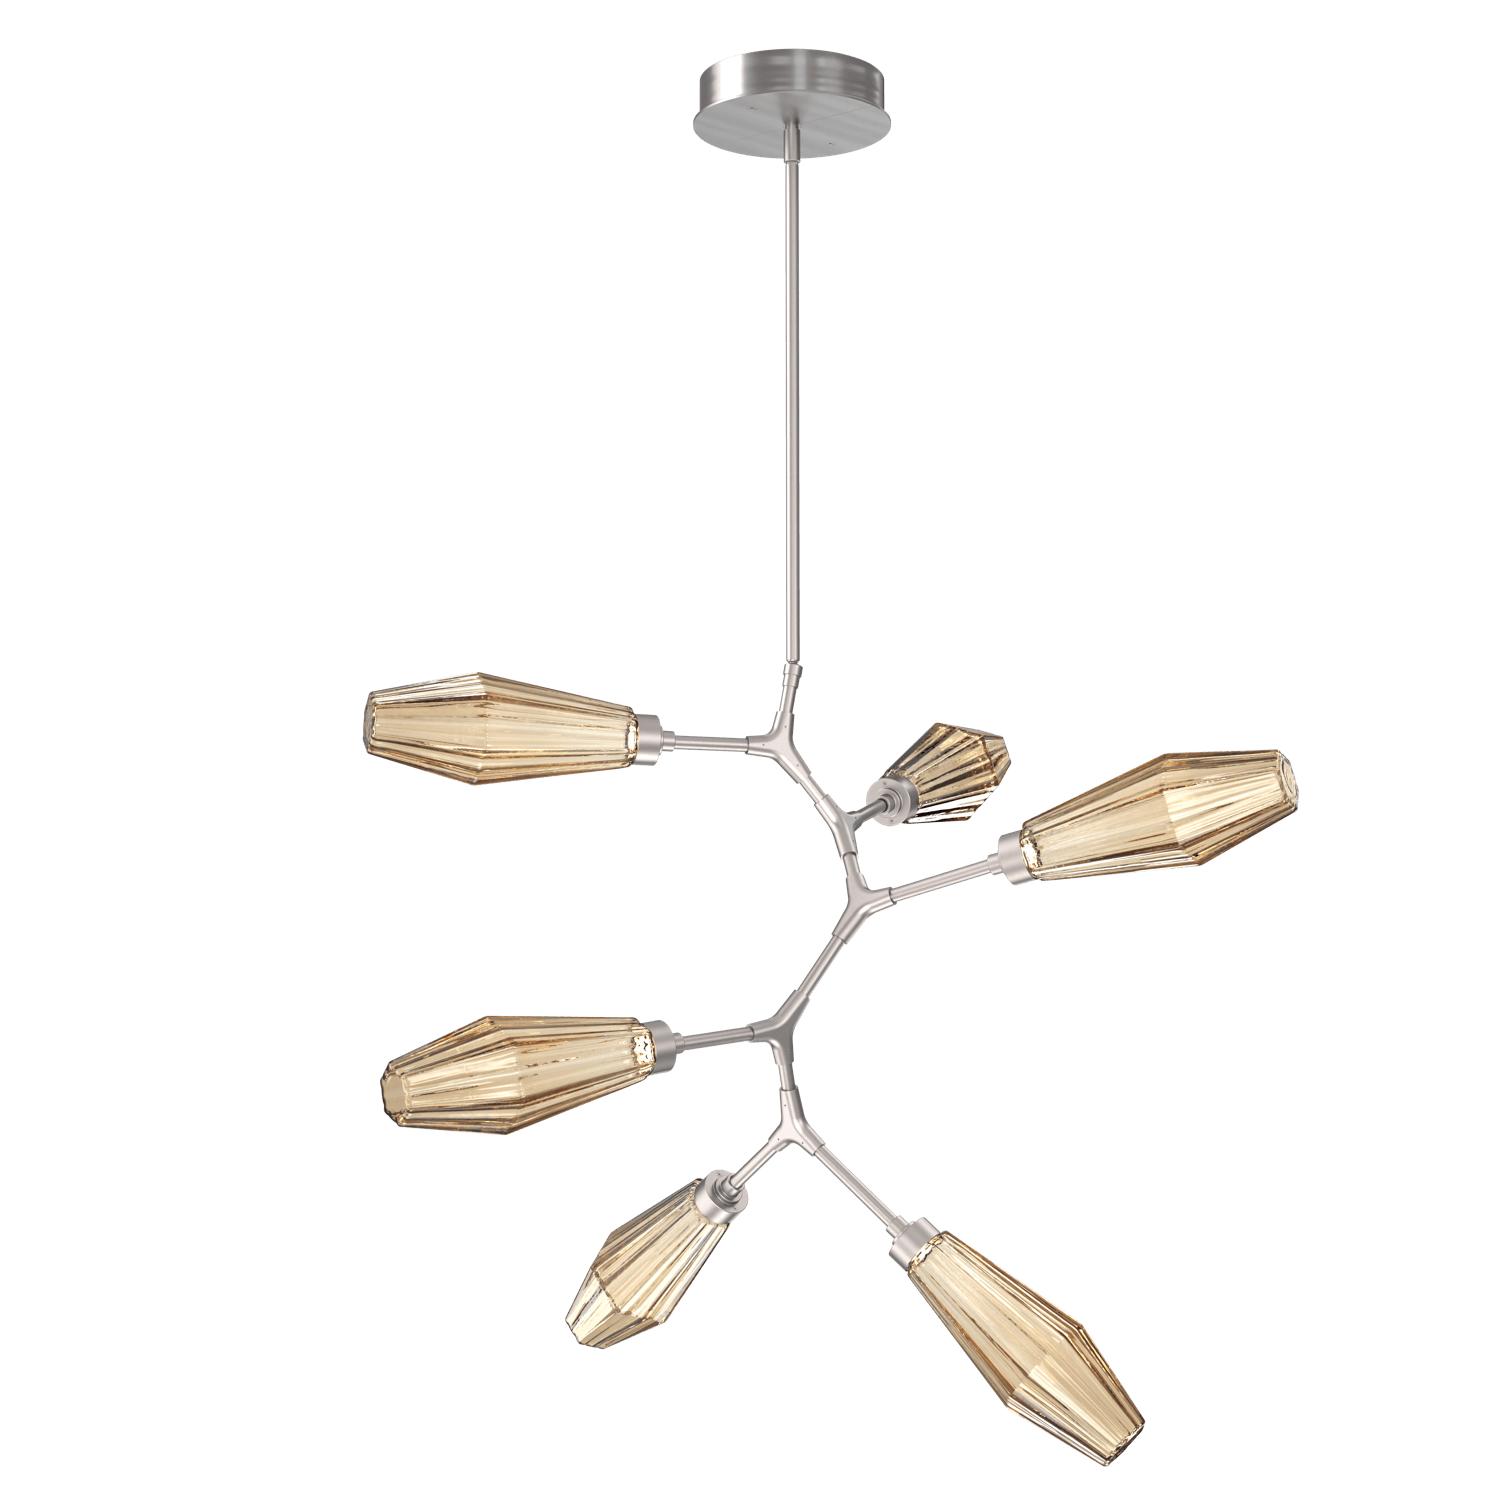 CHB0049-VA-SN-RB-Hammerton-Studio-Aalto-6-light-modern-vine-chandelier-with-satin-nickel-finish-and-optic-ribbed-bronze-glass-shades-and-LED-lamping